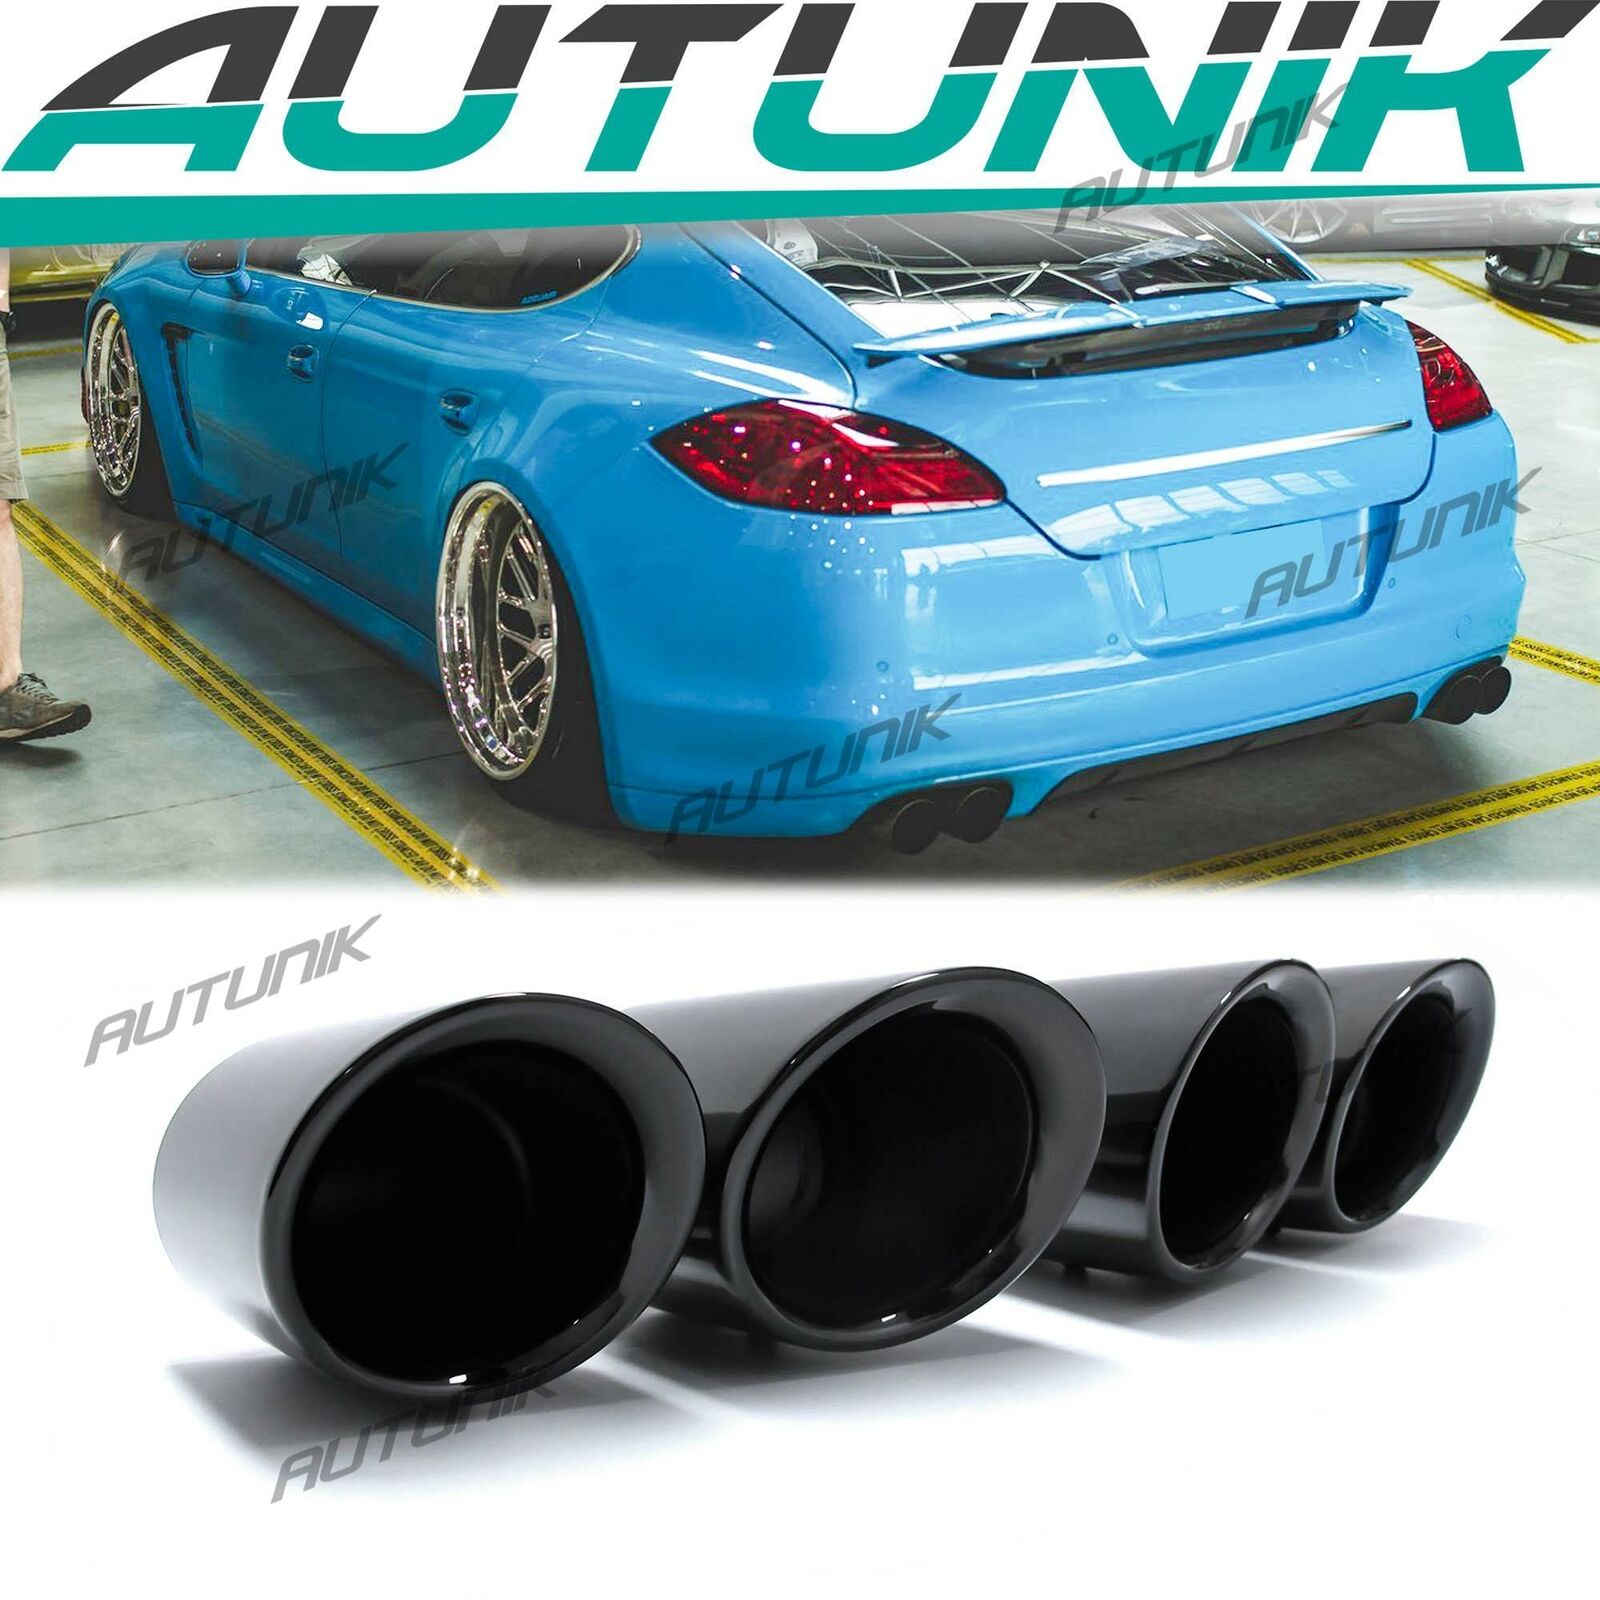 Black Sport Exhaust Tailpipe Tips for 2010-2013 Porsche Panamera 970 Base